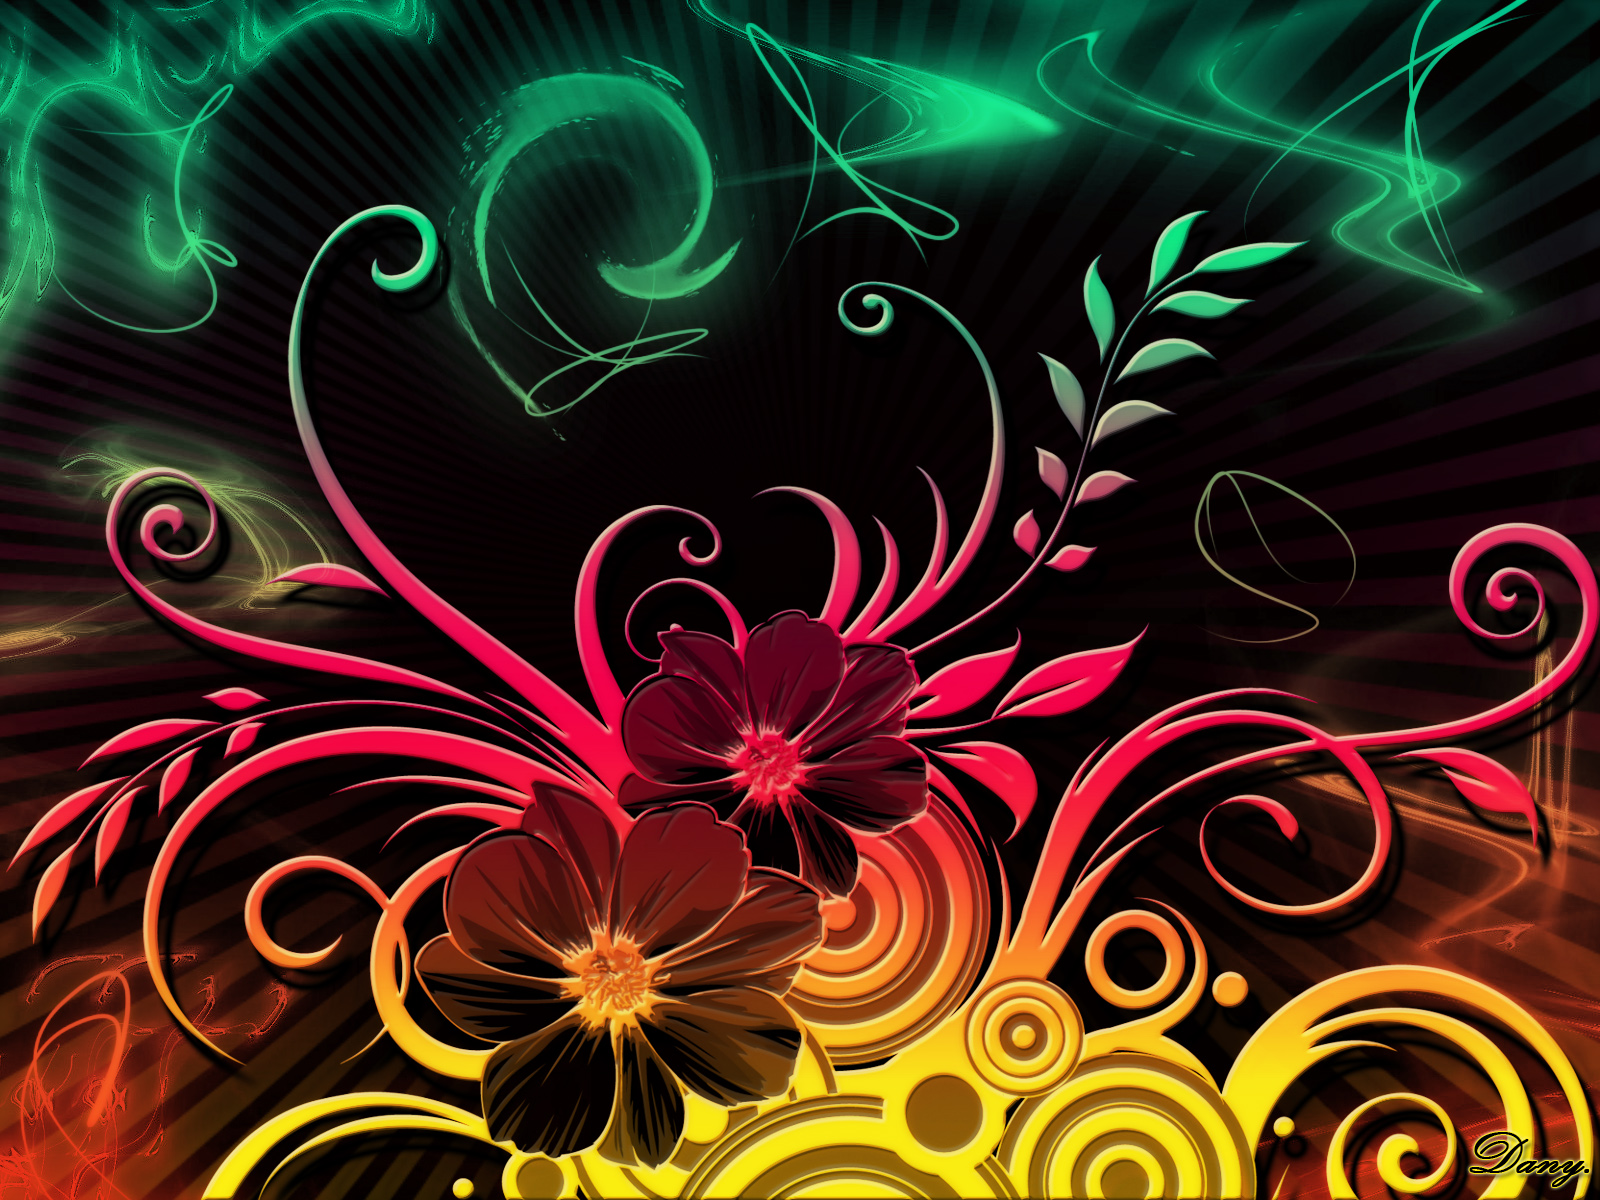 Get Colorful Background For Your Desktop And Give It A More